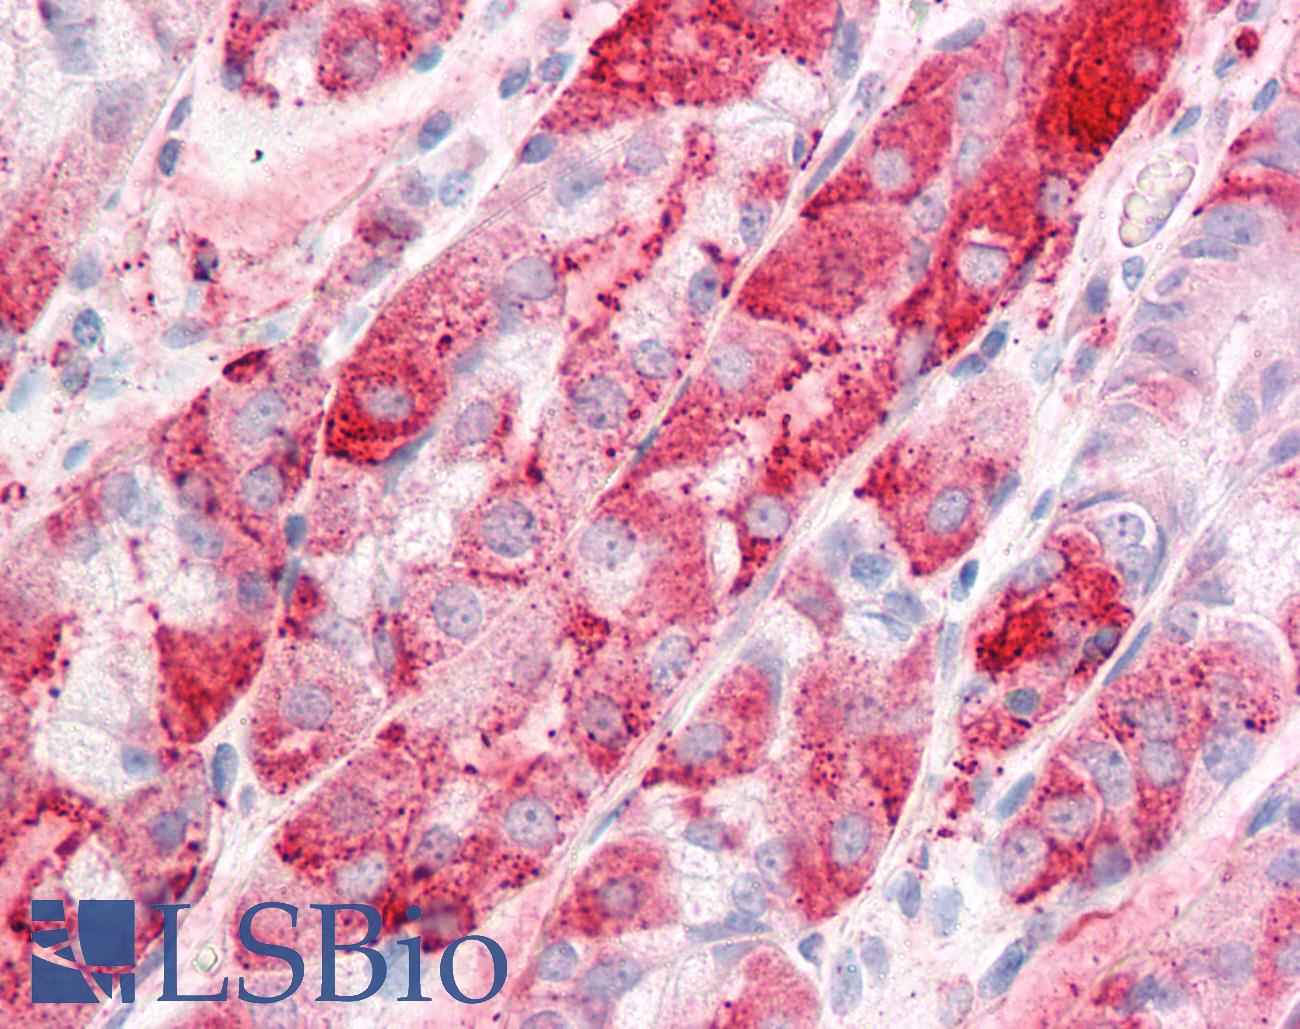 C14orf1 Antibody - Anti-C14orf1 antibody IHC of human stomach. Immunohistochemistry of formalin-fixed, paraffin-embedded tissue after heat-induced antigen retrieval.